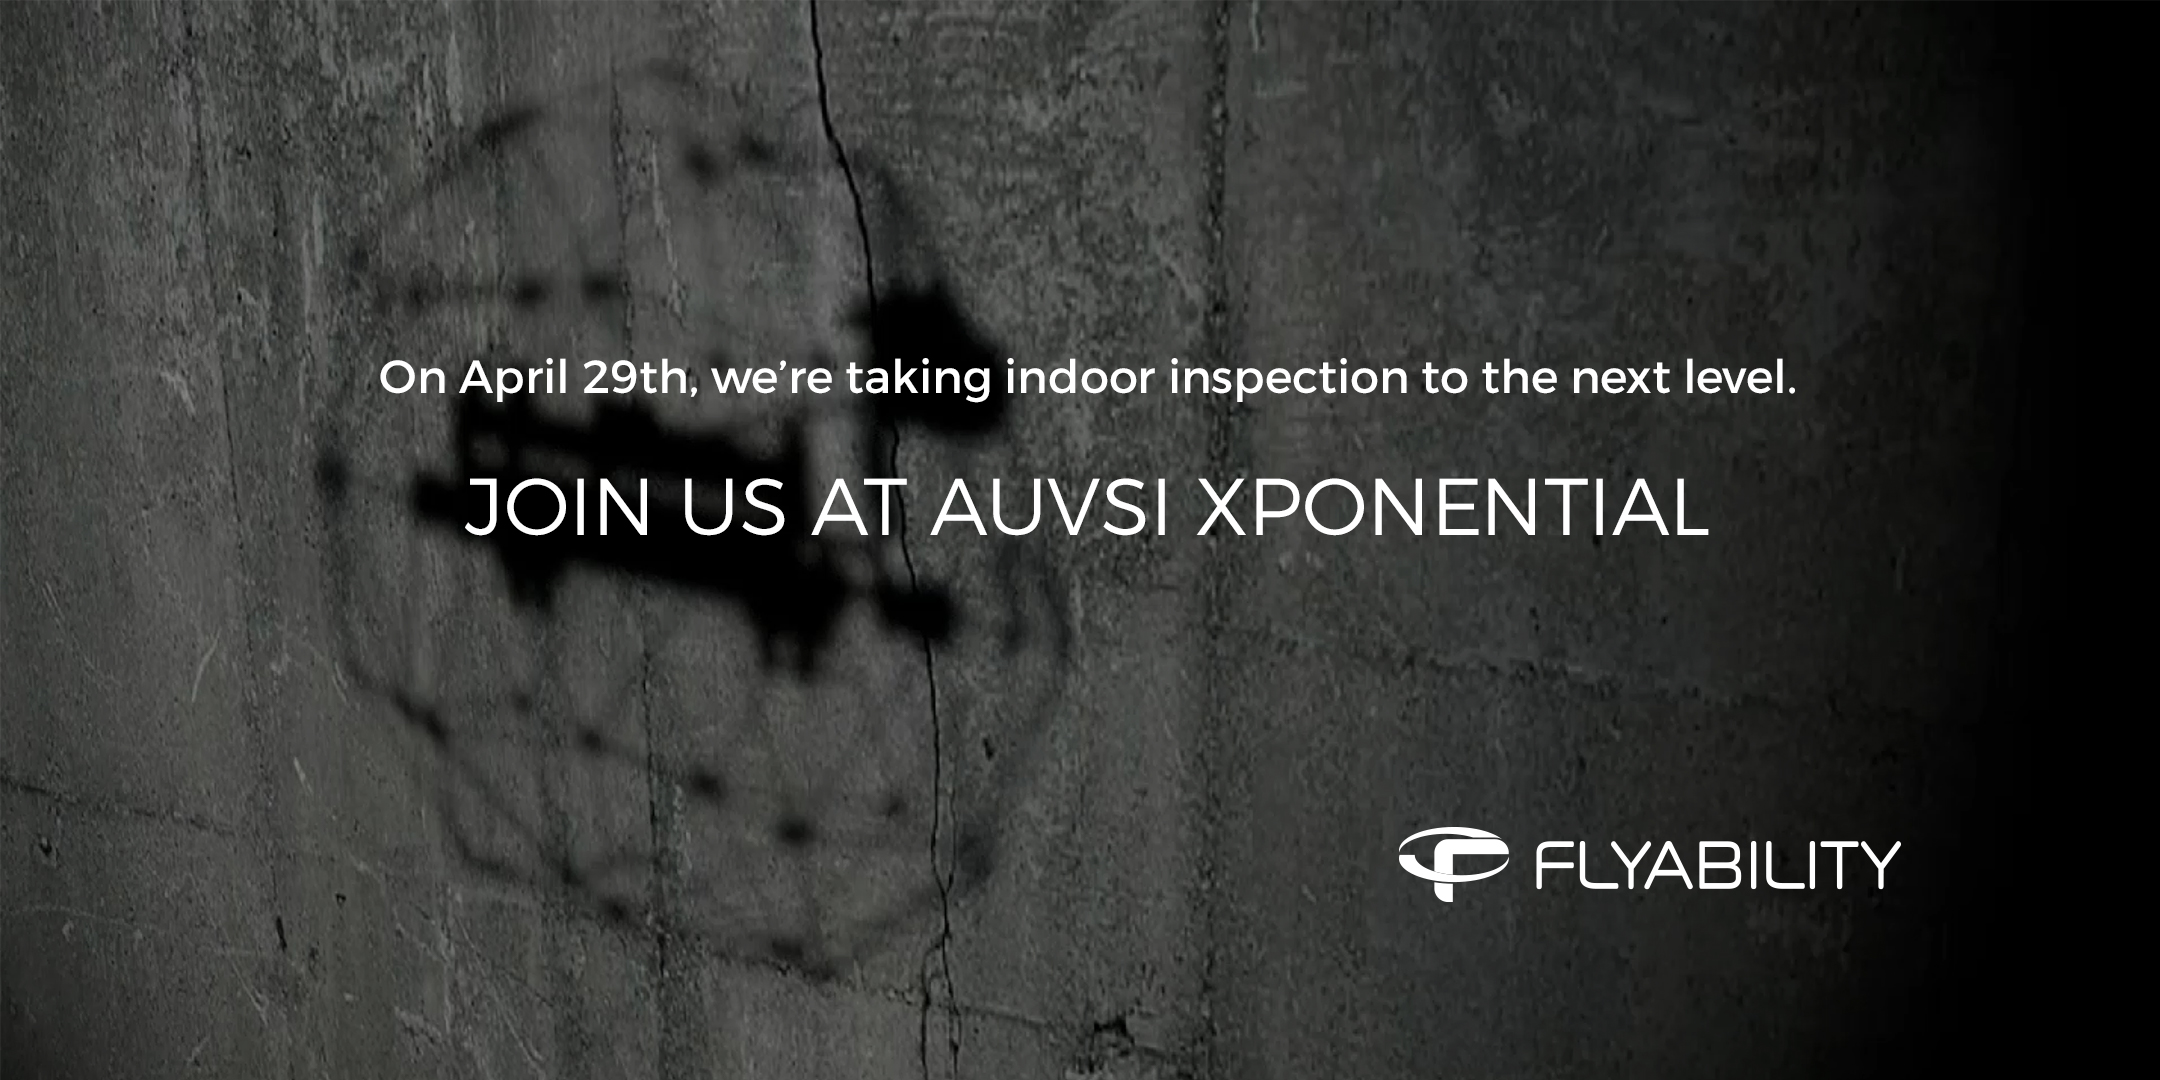 AUVSI April 29 - DISCOVER THE FUTURE OF INDOOR INSPECTION